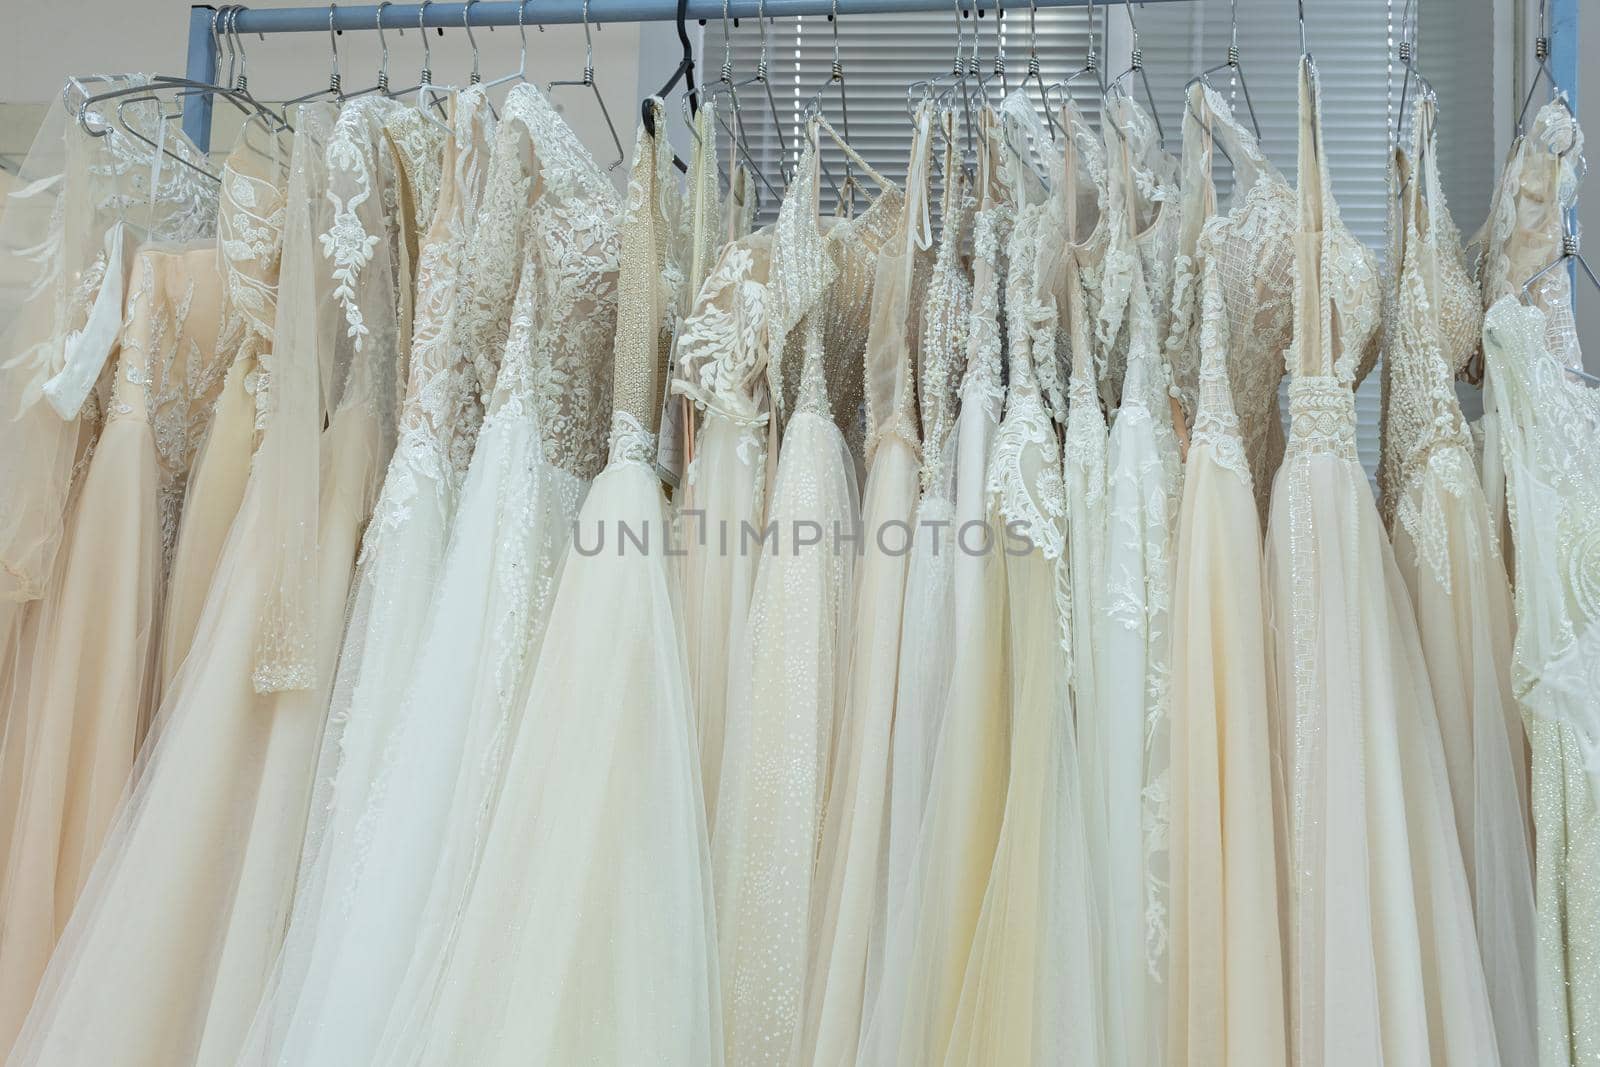 White and cream wedding dresses on a hanger in a bridal boutique. Close up.